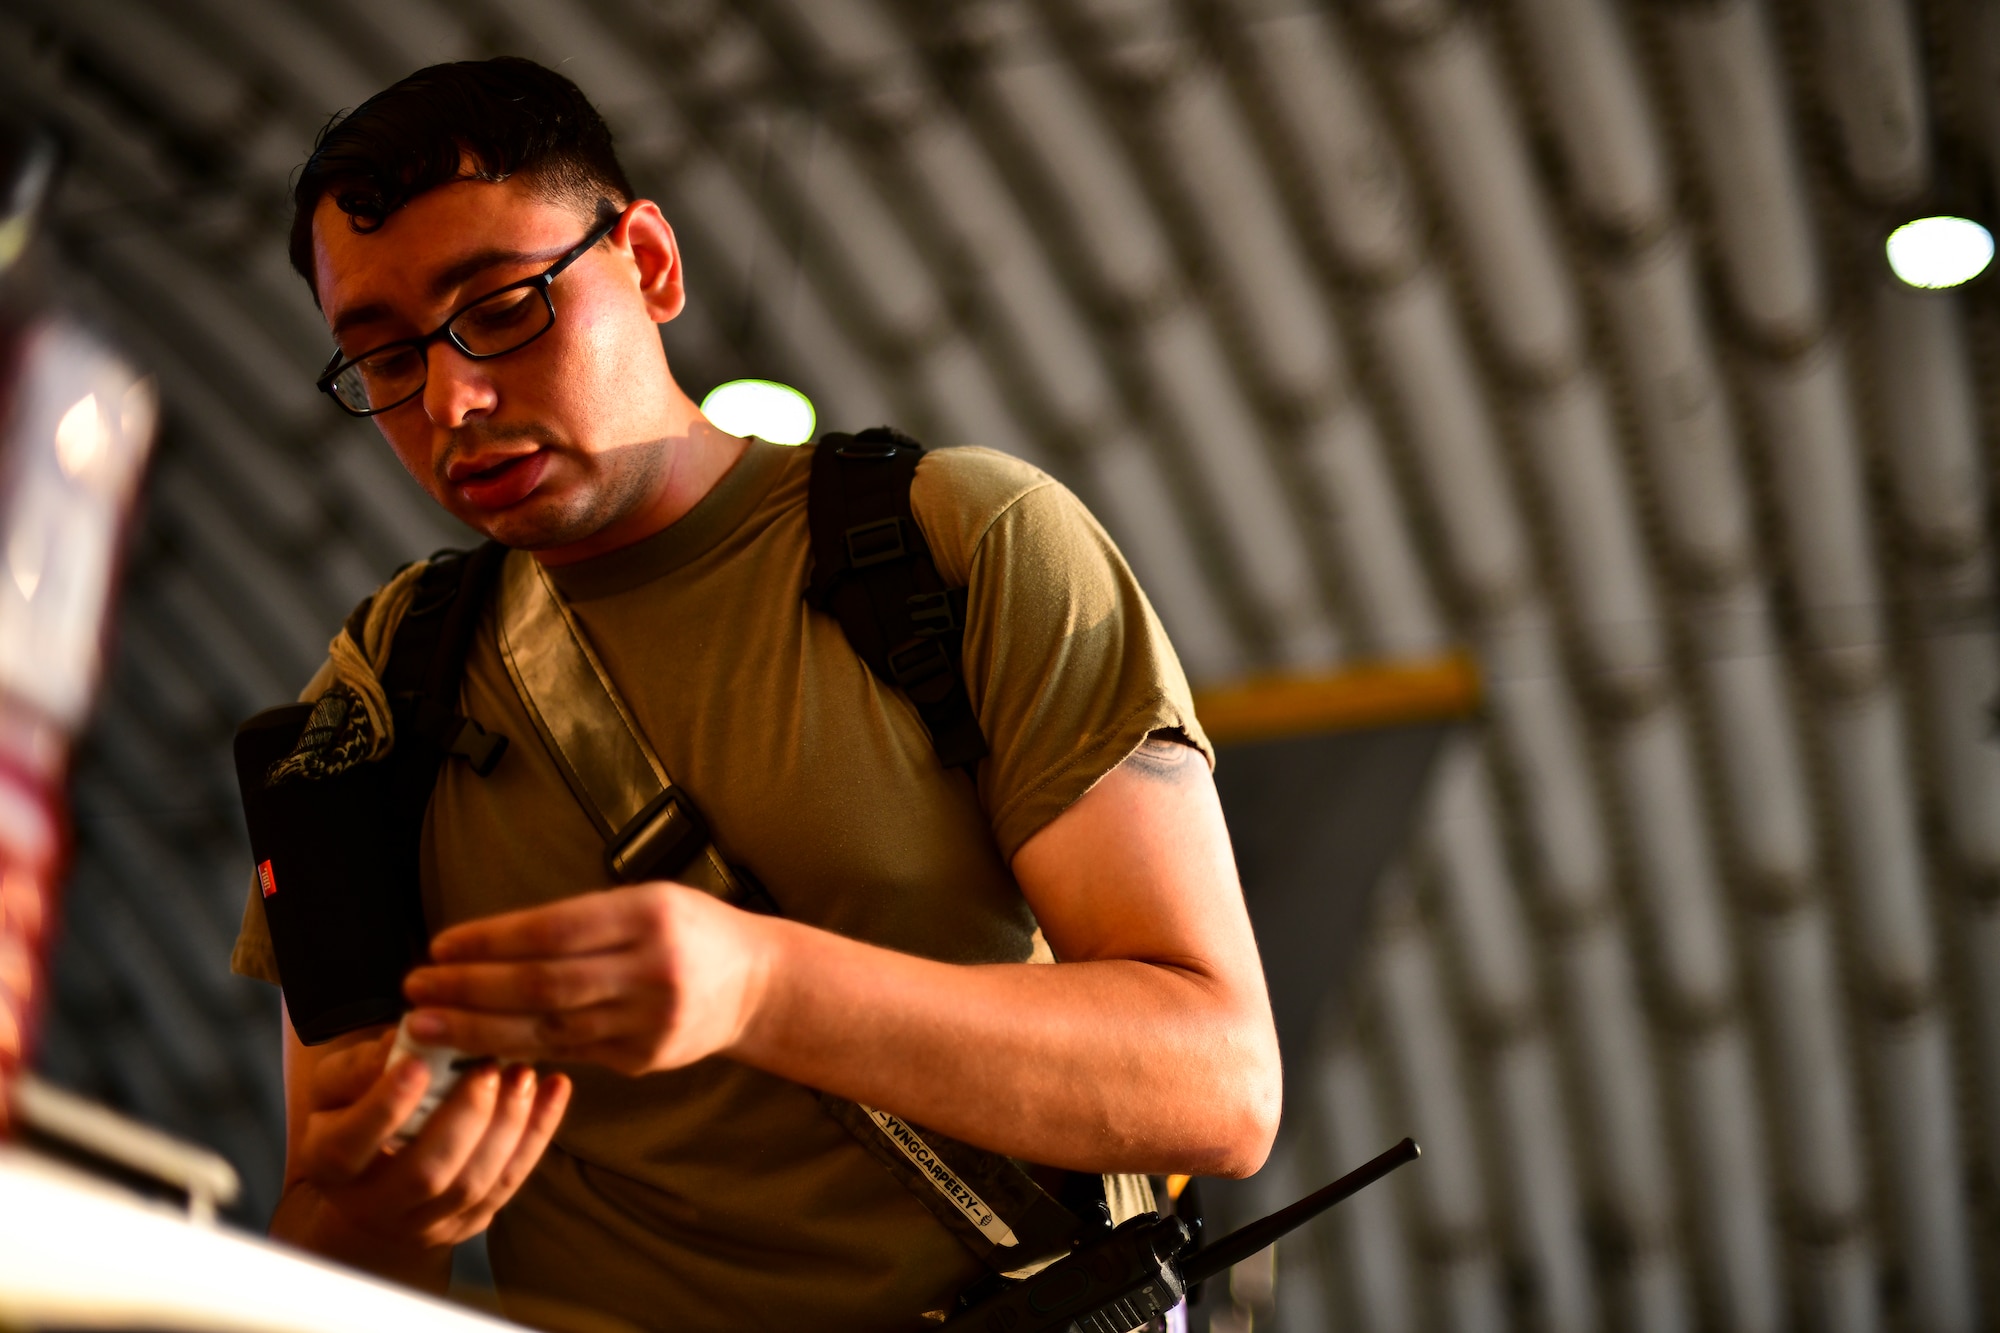 An Airman poses for a portrait.